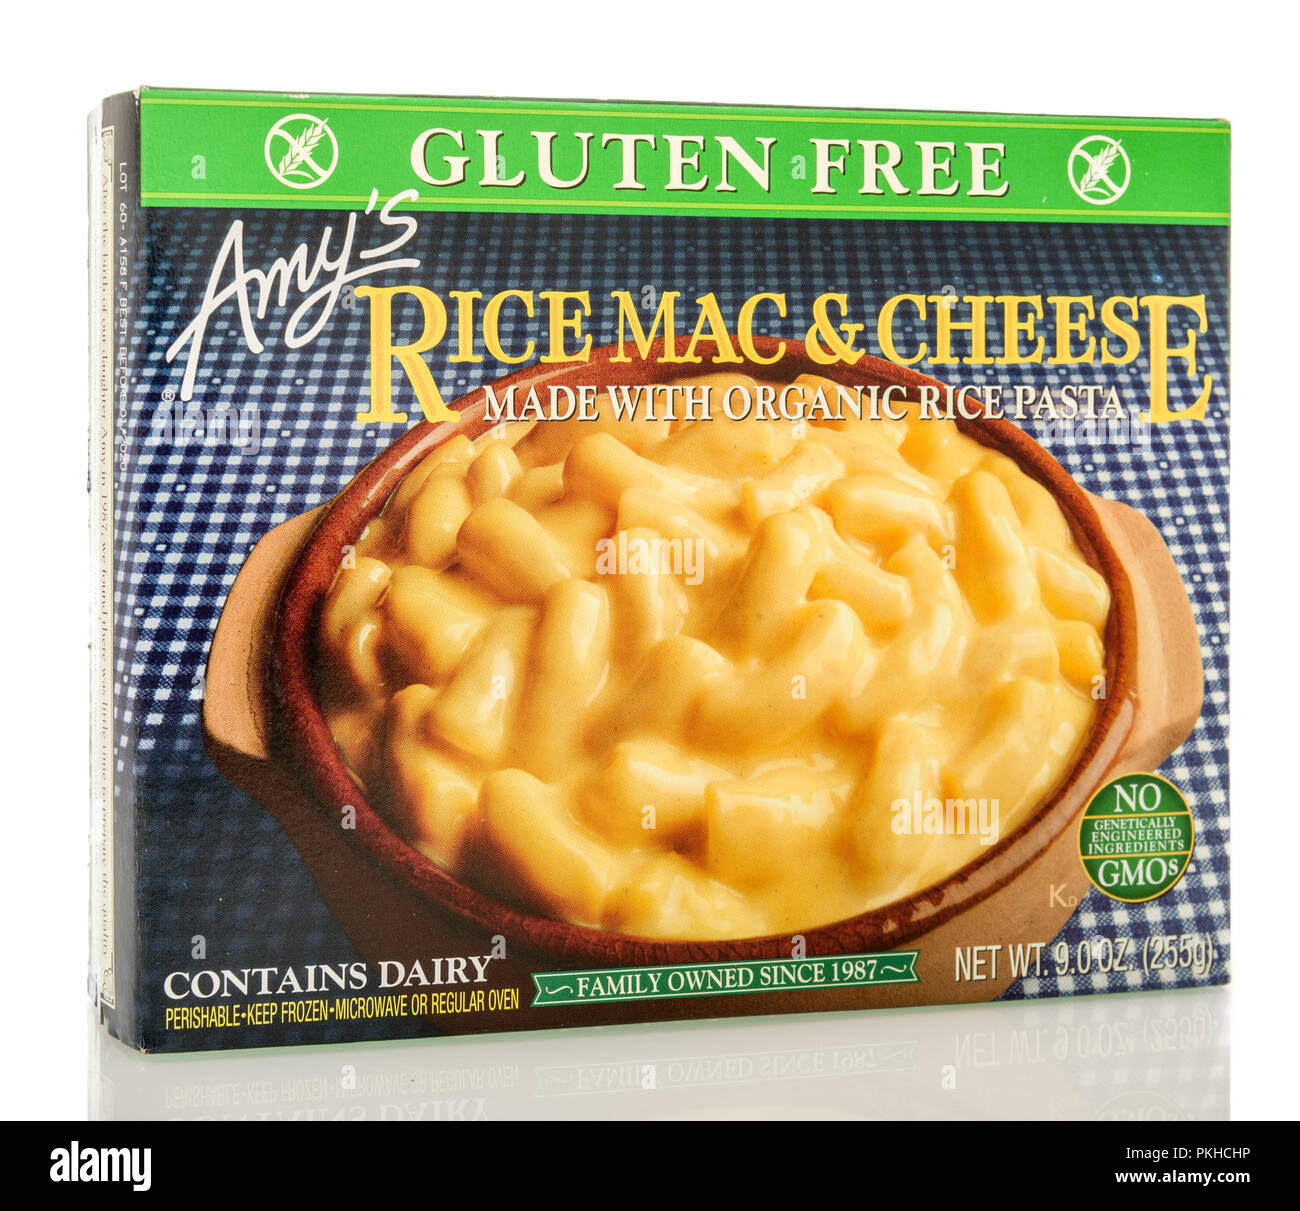 Winneconne, WI - 12 September 2018: A box of Amy's Rice mac and cheese made with organic rice pasta on an isolated background Stock Photo